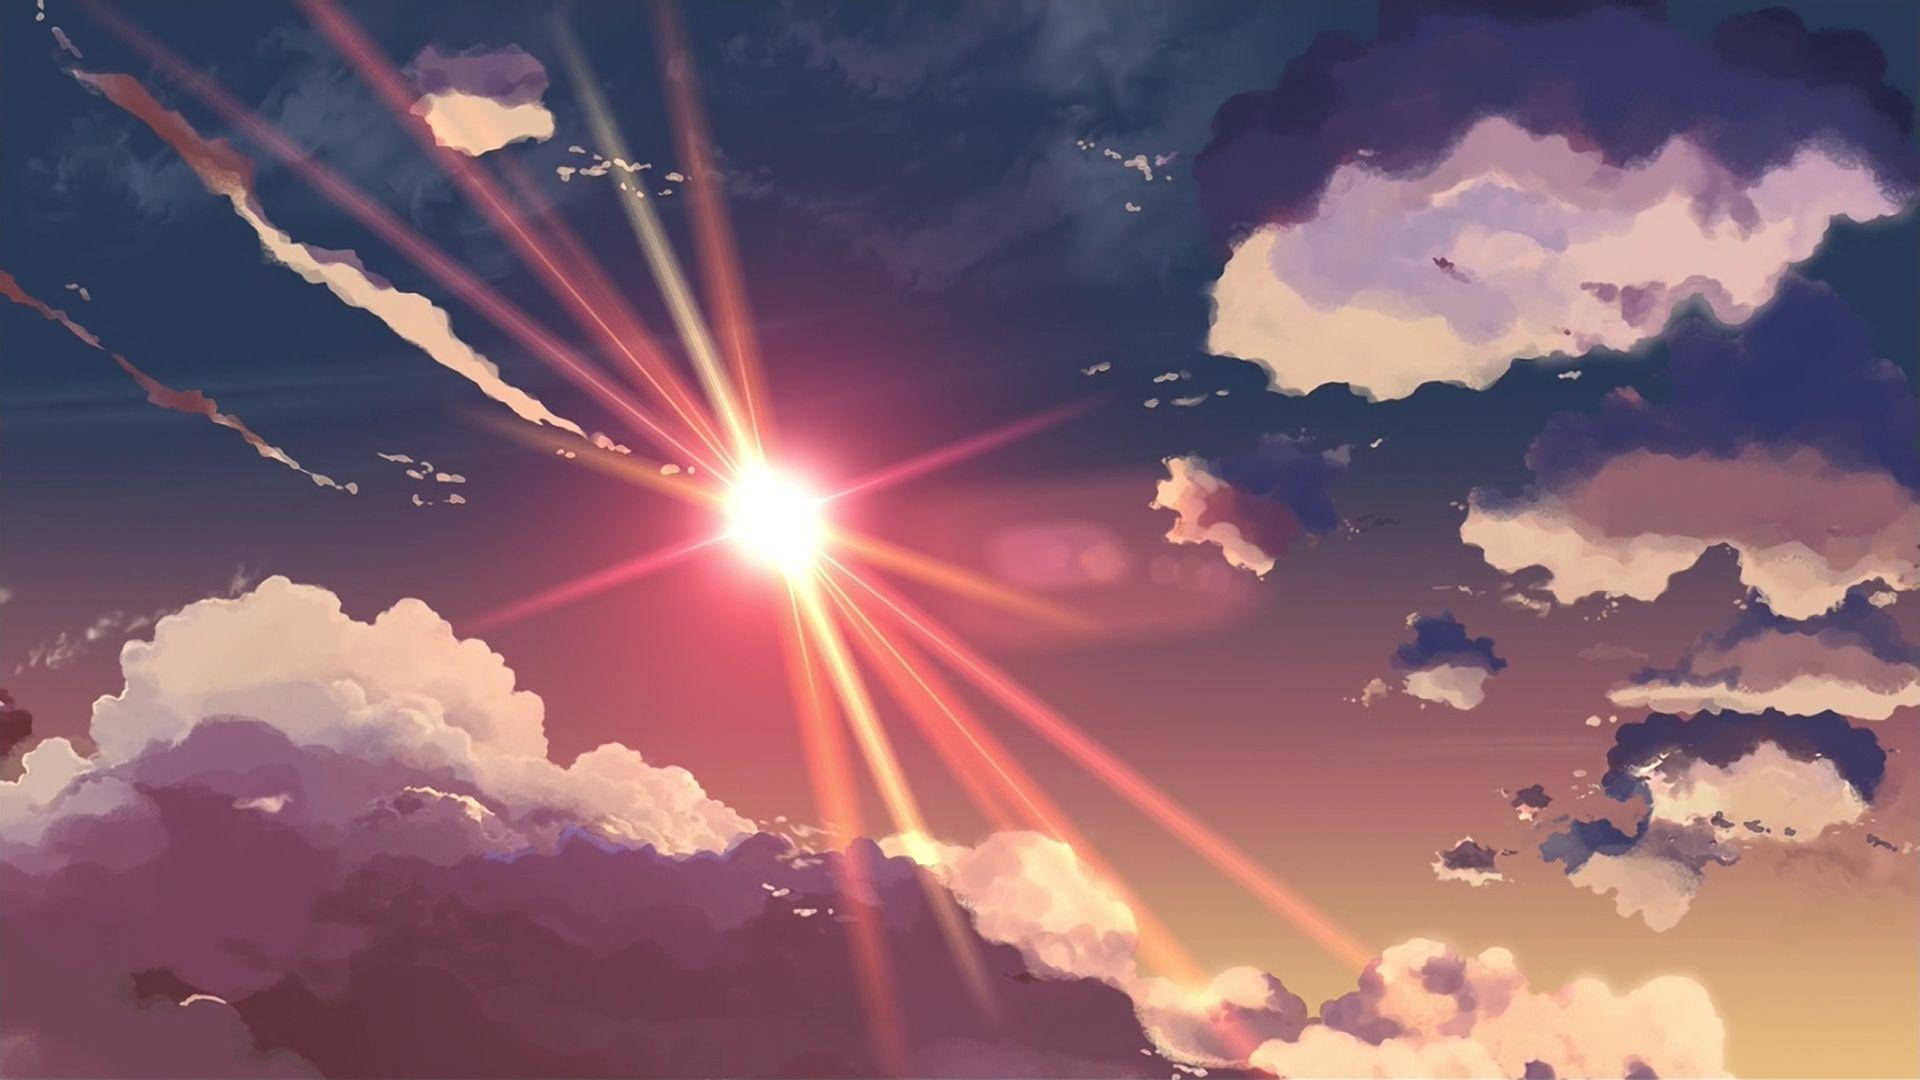 The Sun In The Sky Aesthetic Anime Scenery Background